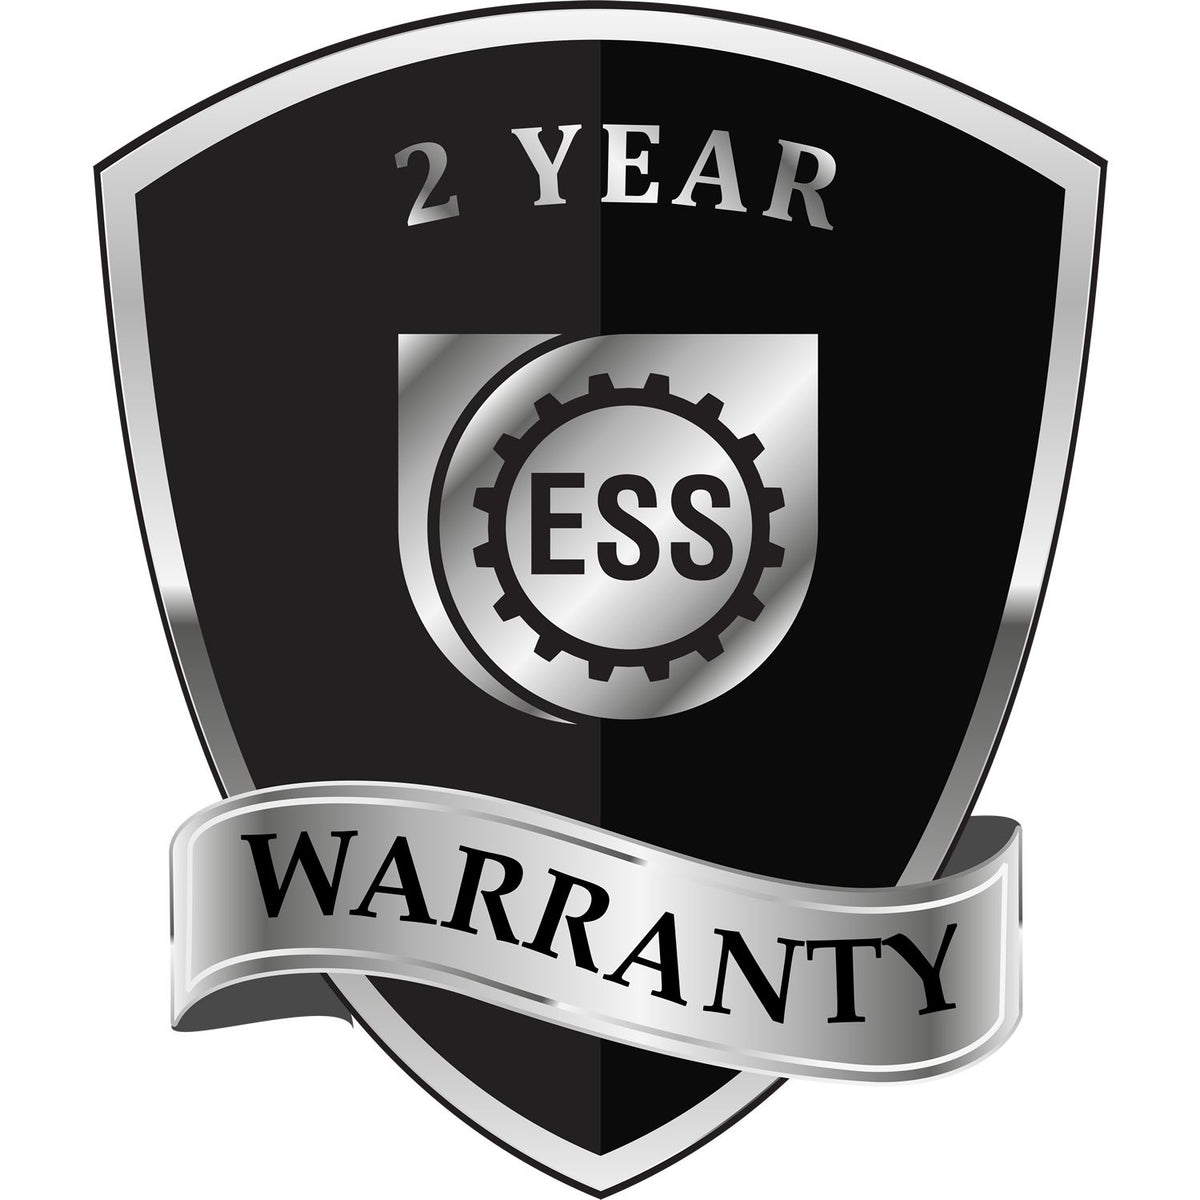 A black and silver badge or emblem showing warranty information for the Soft District of Columbia Professional Geologist Seal